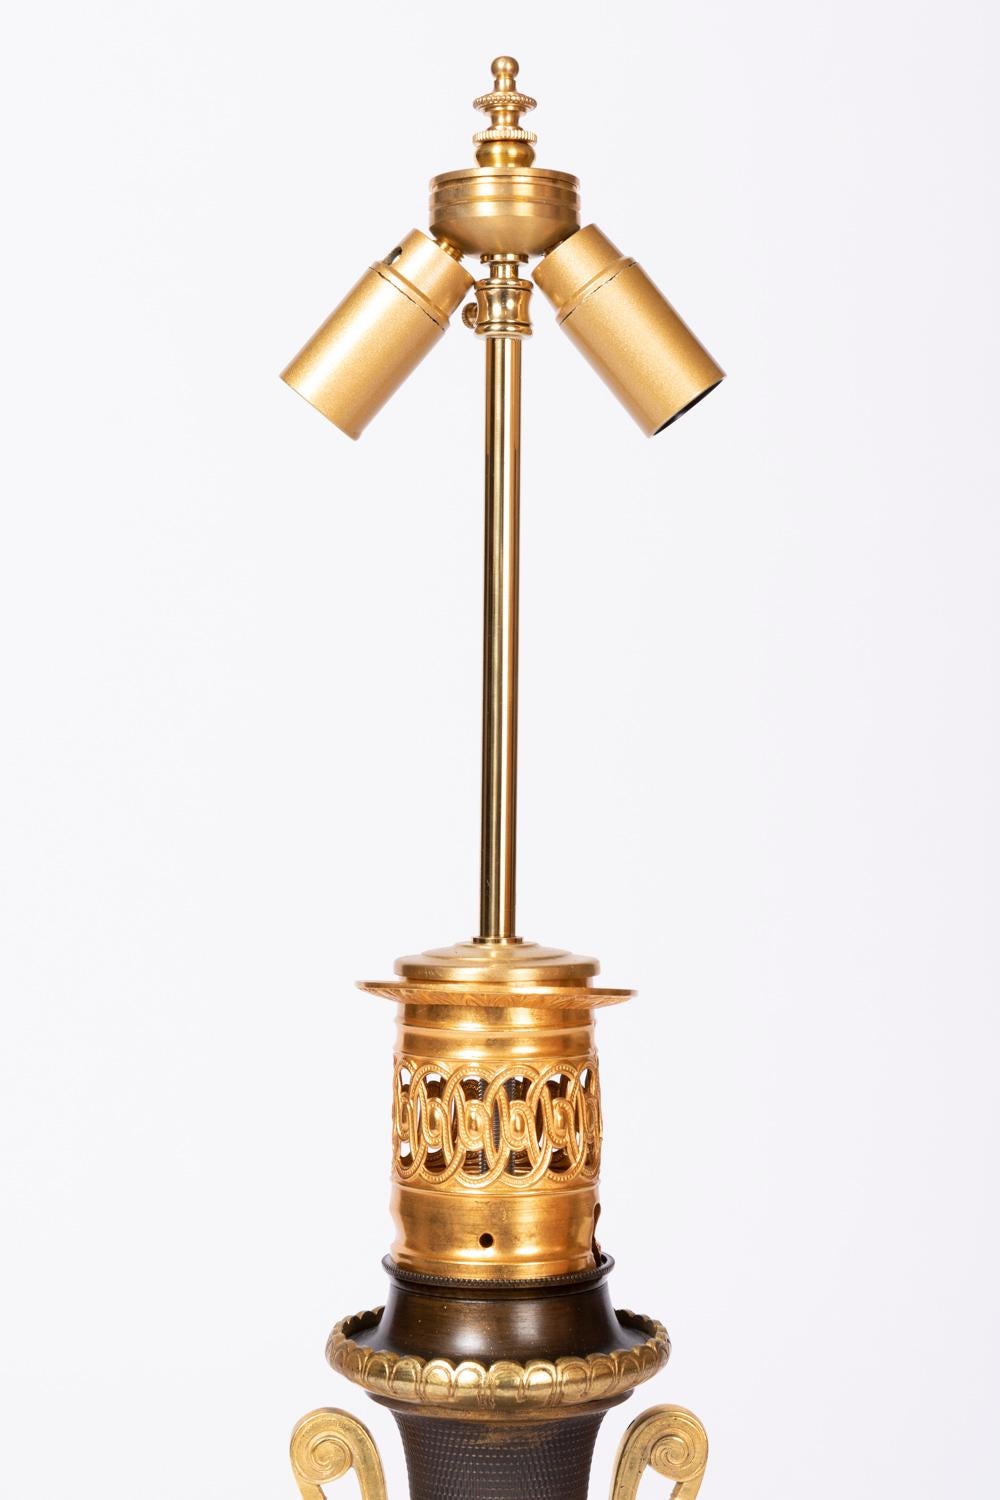 Baluster shape lamp in brown guilloche sheet metal with a second bulged part beneath the body.
Chiselled and gilt bronze mount. High part with openwork interlacing motifs and a frieze of gadroons. Ringed neck where are fixed neoclassical handles